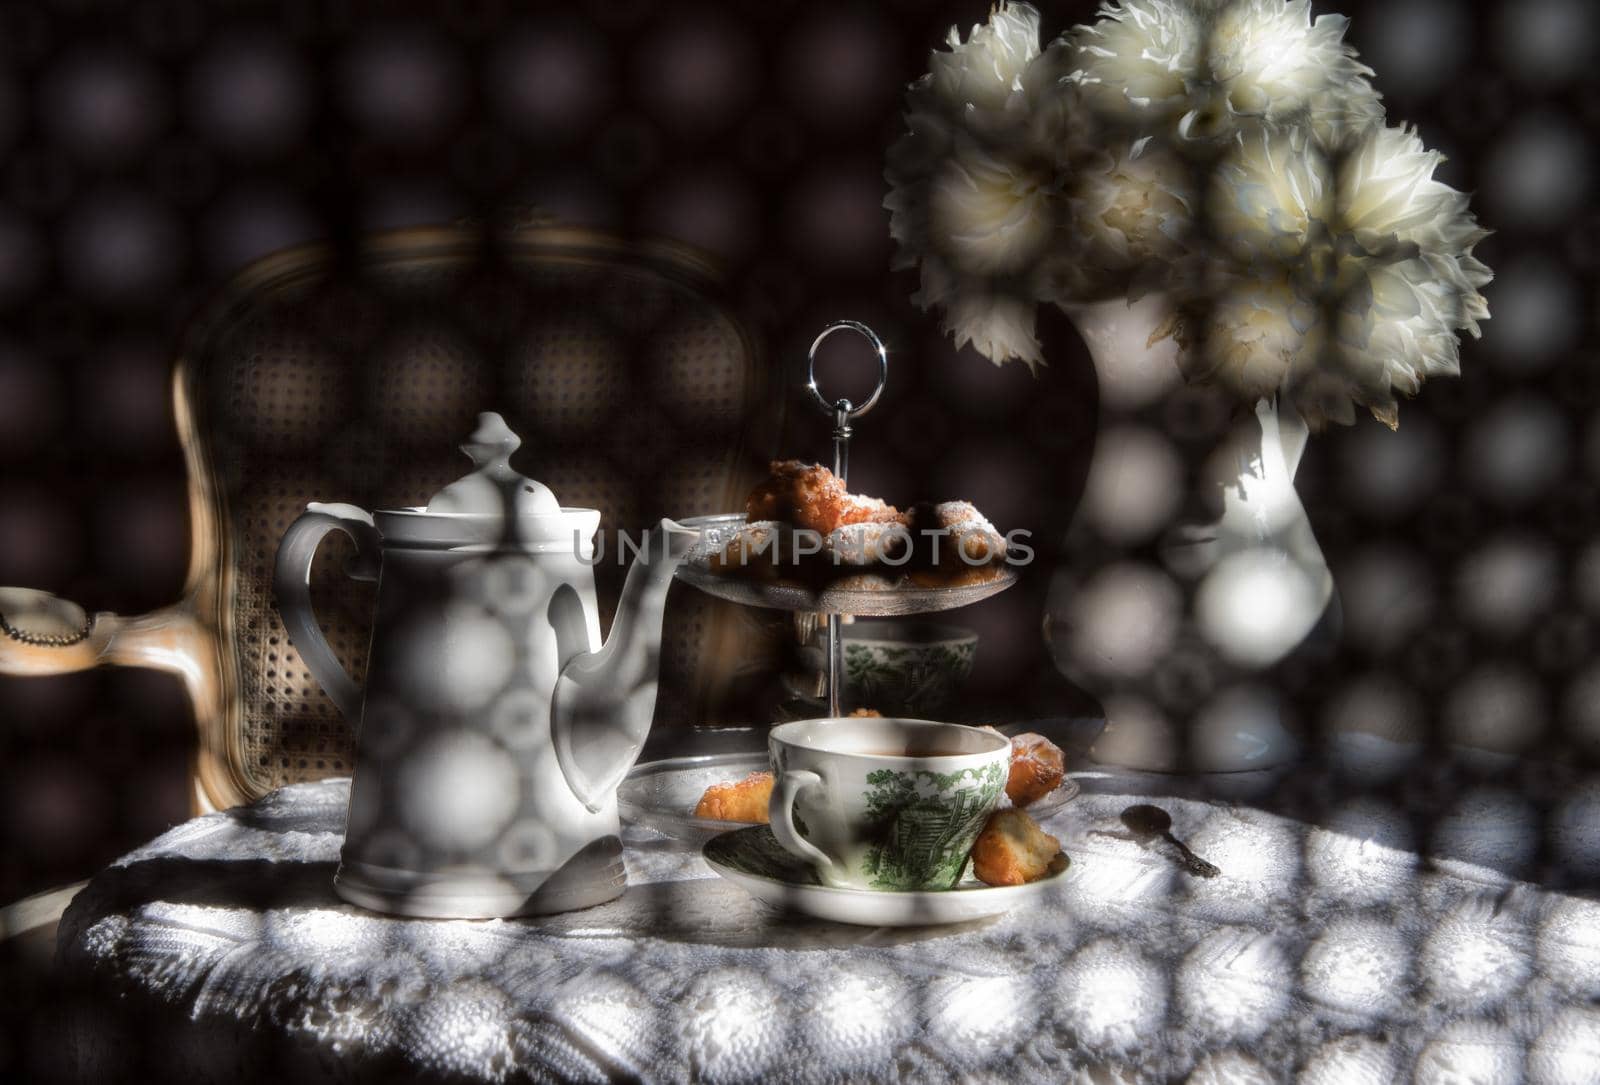 abstract photography over the back of a chair in blur, English style tea break by KaterinaDalemans